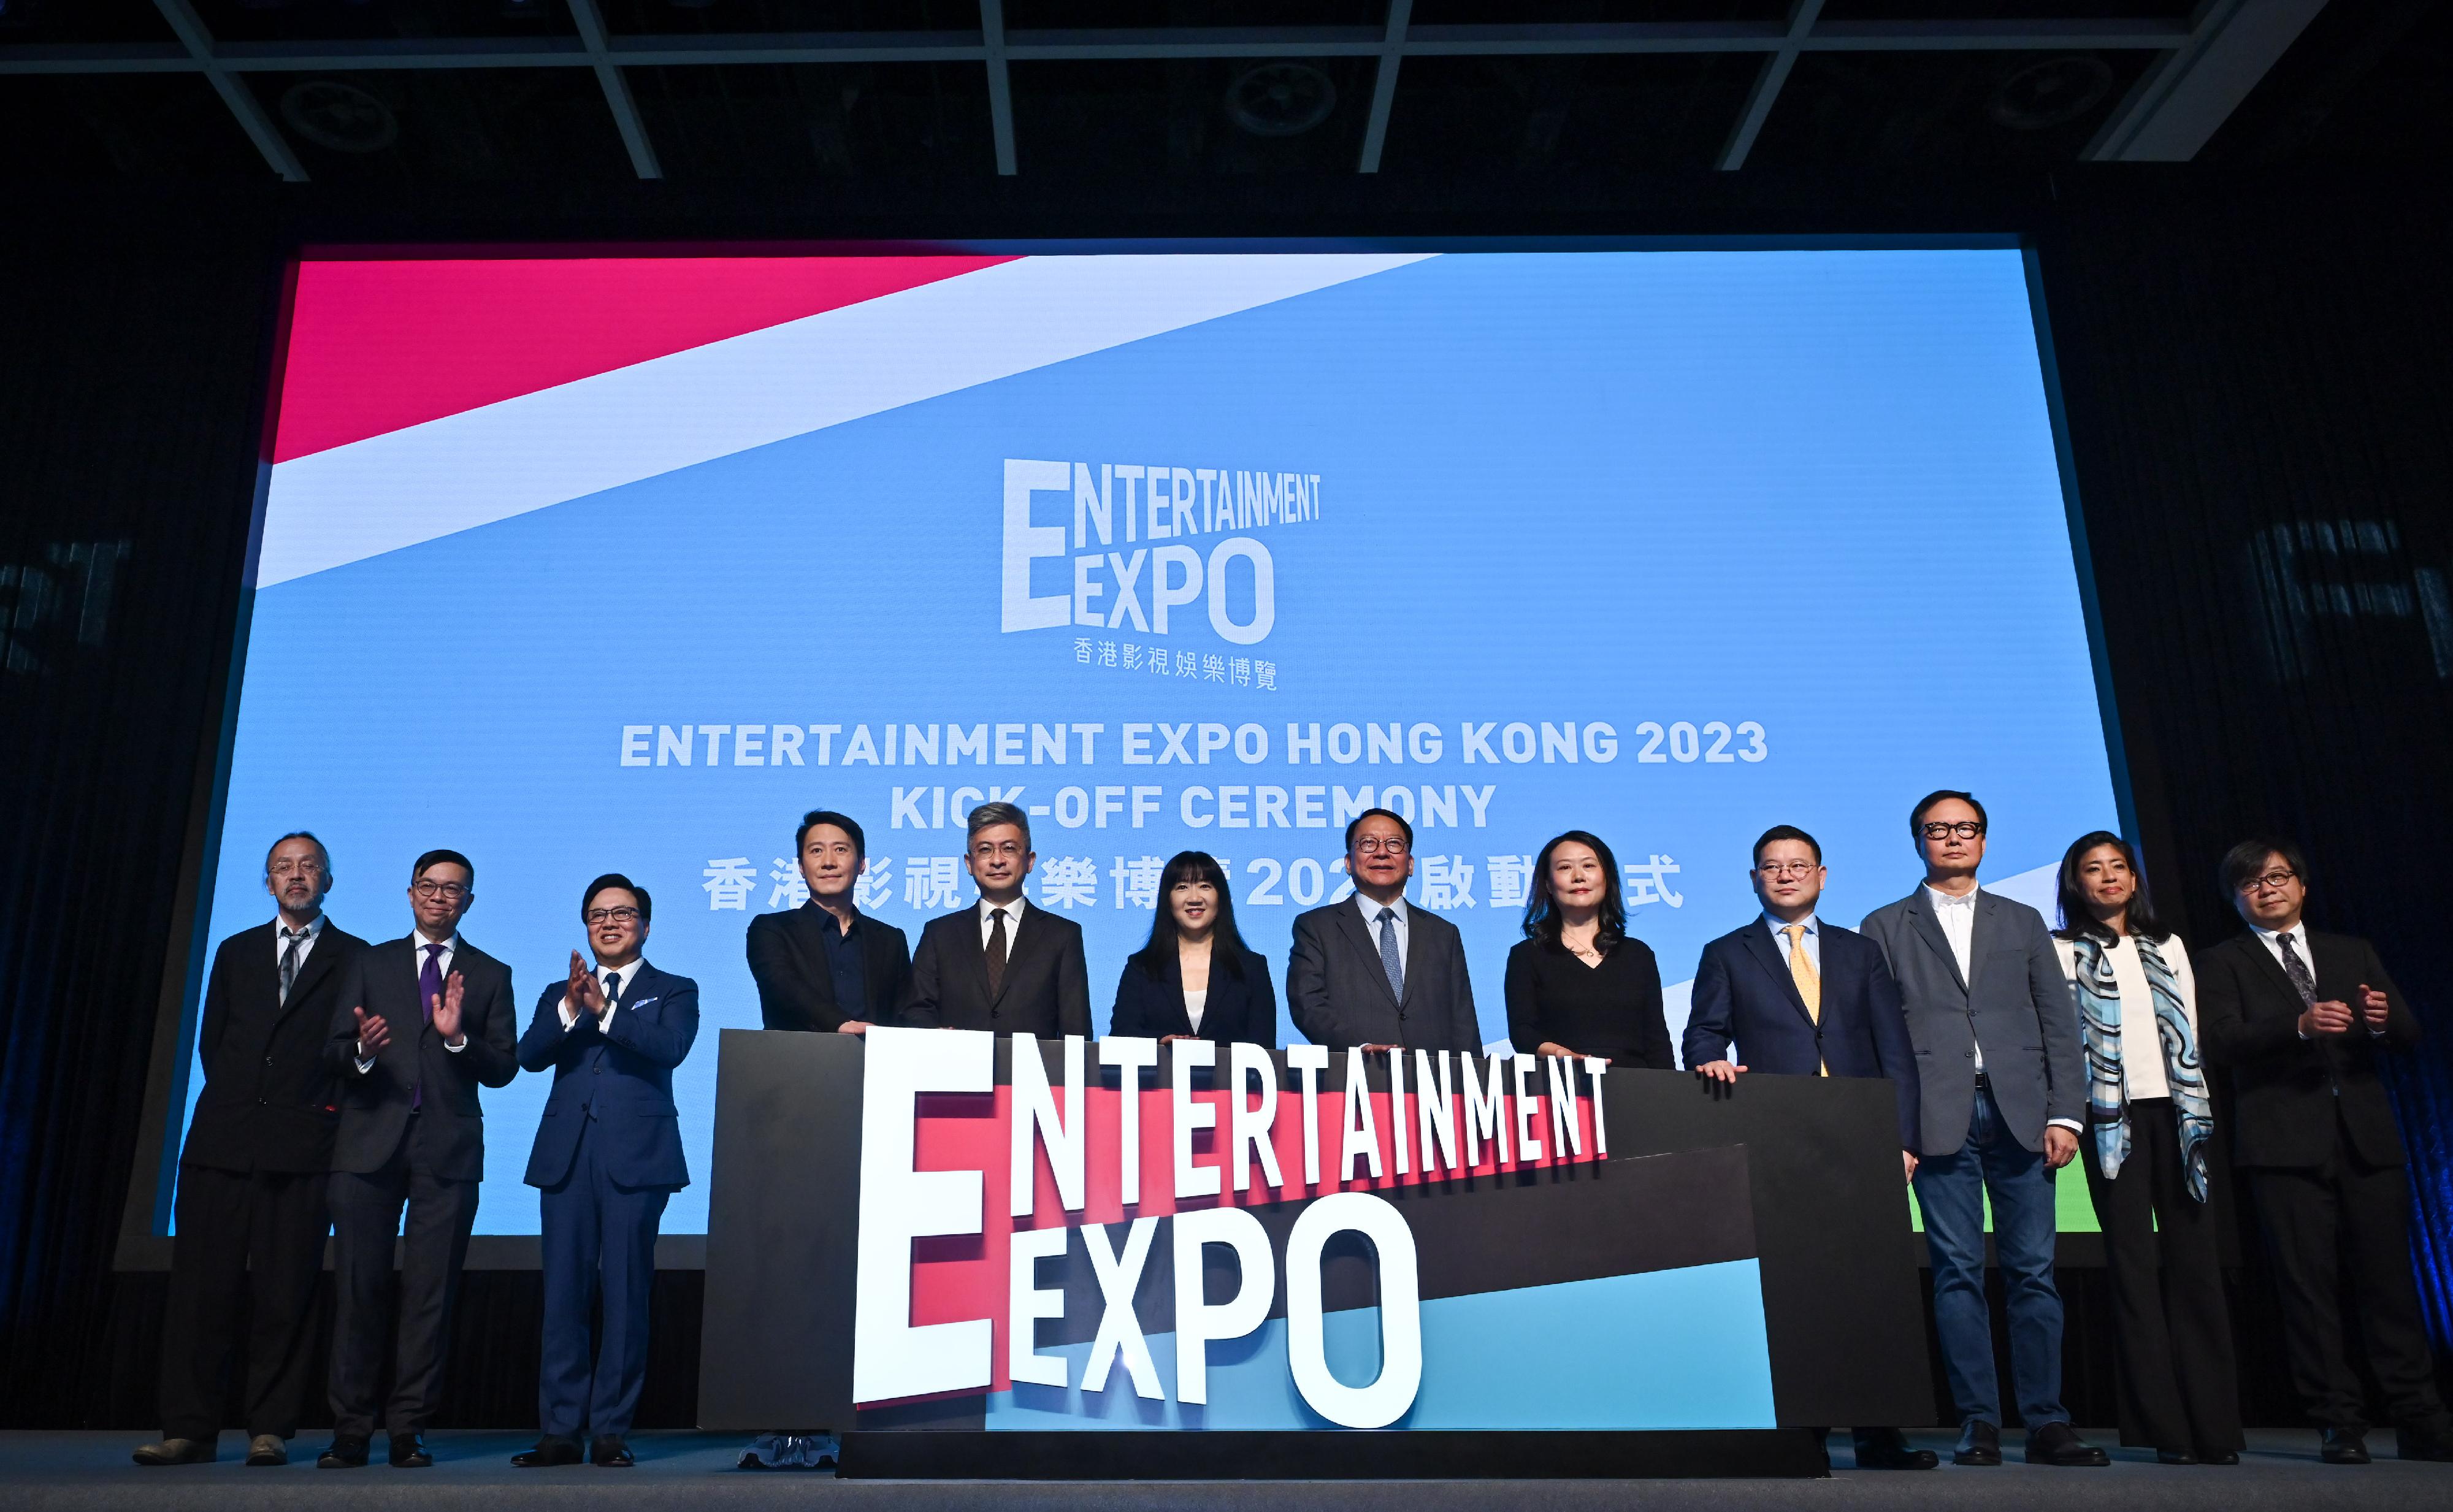 The Chief Secretary for Administration, Mr Chan Kwok-ki, attended the Kick-off Ceremony of the Entertainment Expo Hong Kong 2023 today (March 13). Photo shows (from fourth left) the Hong Kong Entertainment Expo Ambassador, Leon Lai; the Acting Secretary for Culture, Sports and Tourism, Mr Raistlin Lau; the Executive Director of the Hong Kong Trade Development Council, Ms Margaret Fong; Mr Chan; First-grade Counsel of the International Cooperation Department of the National Radio and Television Administration Ms Zhou Jihong; Deputy Director-General of the Department of Publicity, Cultural and Sports Affairs of the Liaison Office of the Central People's Government in the Hong Kong Special Administrative Region Mr Zhang Guoyi, and other guests officiating at the kick-off ceremony.